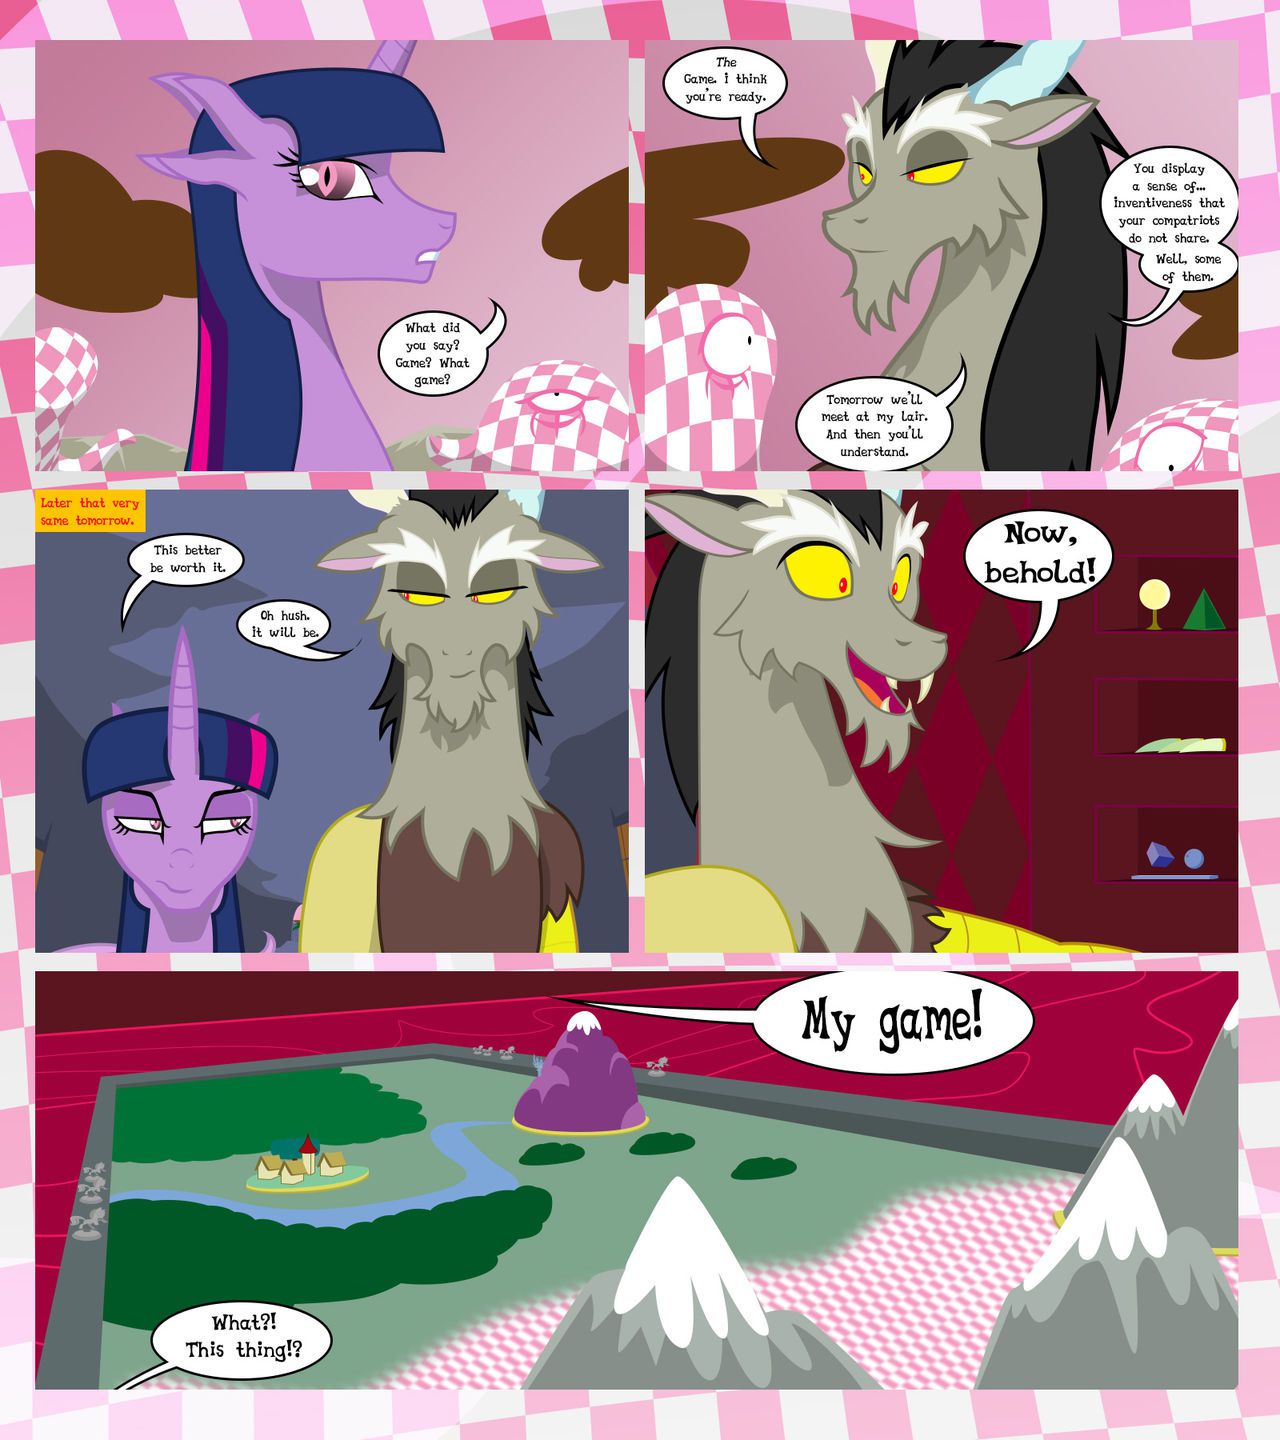 [GatesMcCloud] Cutie Mark Crusaders 10k: Chapter 3 - The Lost (My Little Pony: Friendship is Magic) [English] [Ongoing] 72